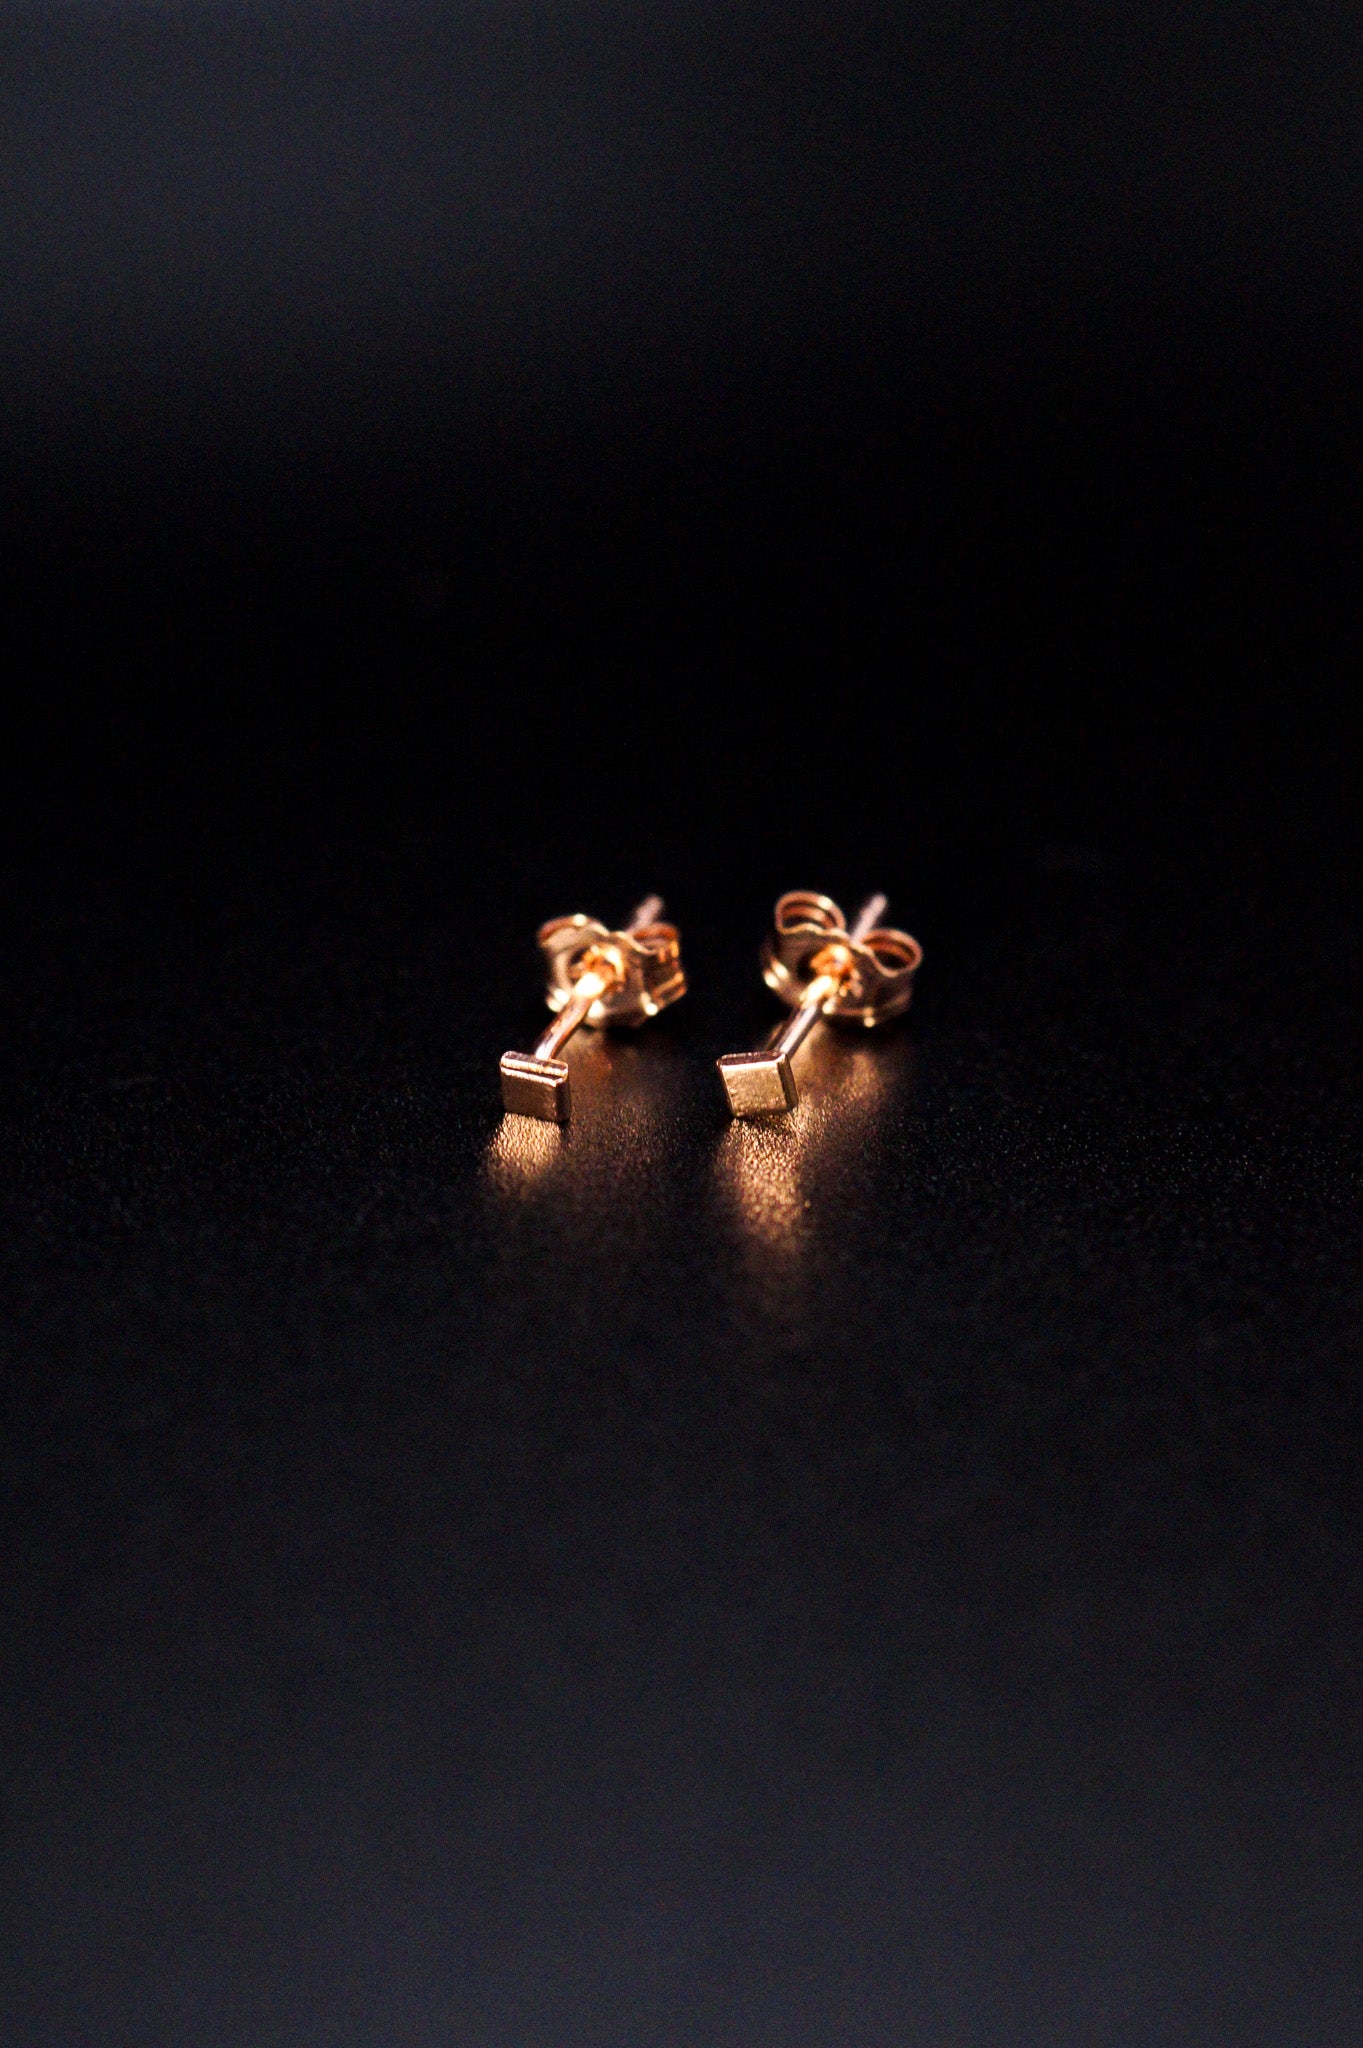 Square Mirror Stud Earrings, Gold Fill, Rose Gold Fill, or Sterling Silver